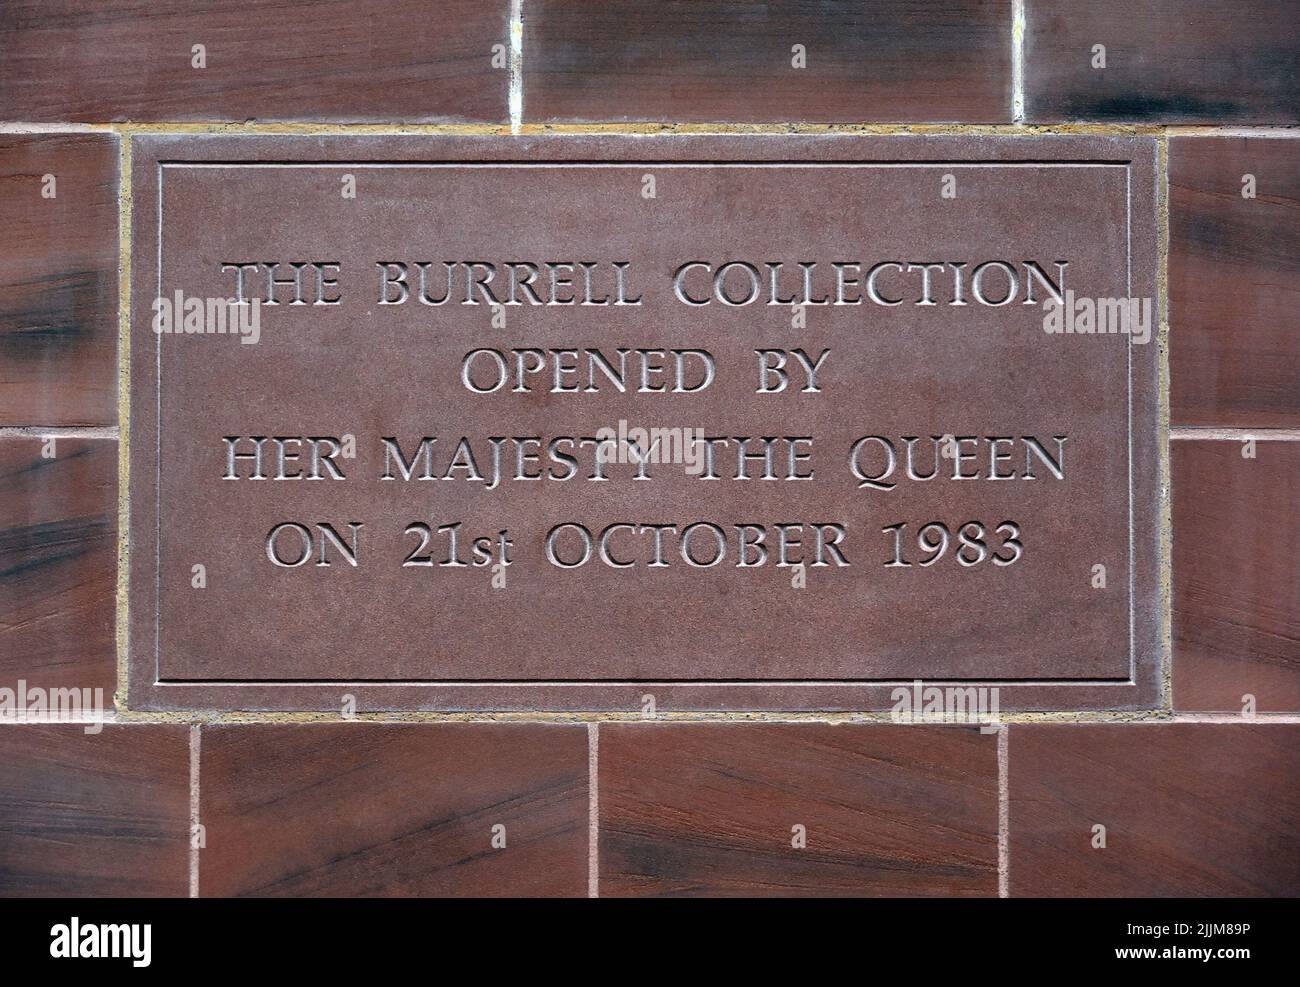 Stone commemorating the opening of The Burrell Collection by Her Majesty The Queen on 21st October 1983.; The Burrell Collection; Glasgow; Scotland. Stock Photo